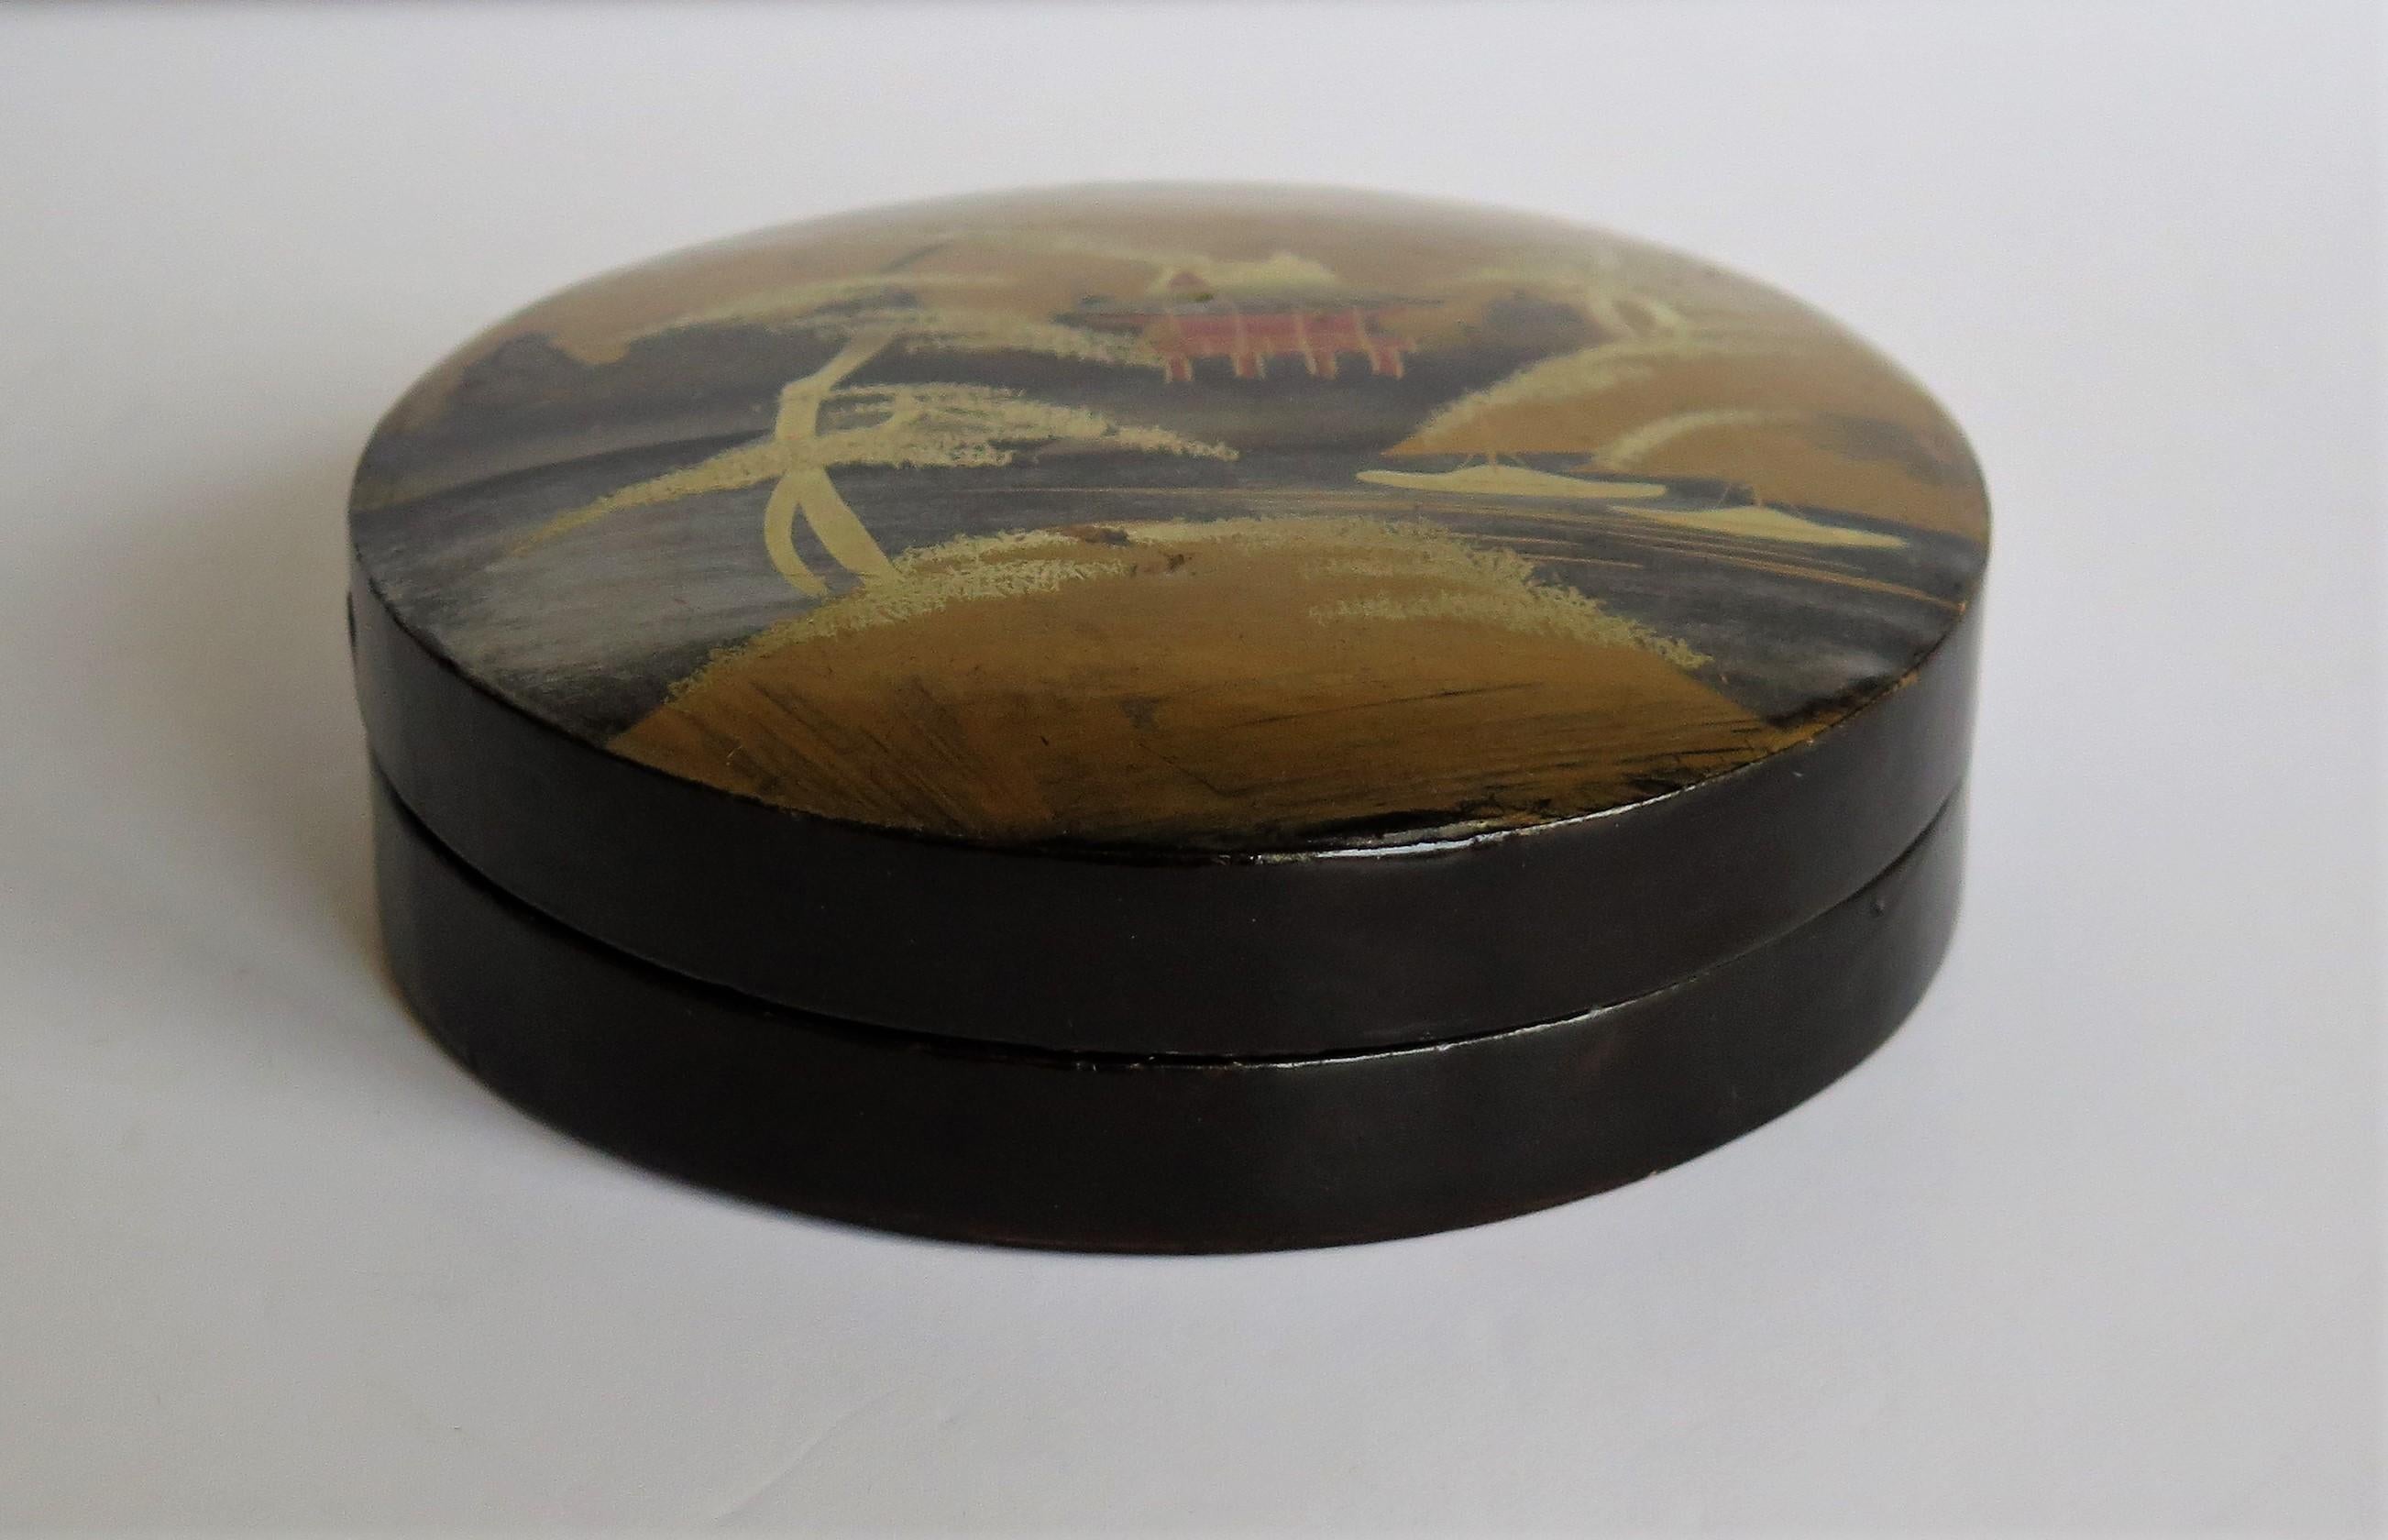 Paper Japanese Laquered Box and Lid Hand Painted Scene, Meiji Period, circa 1900